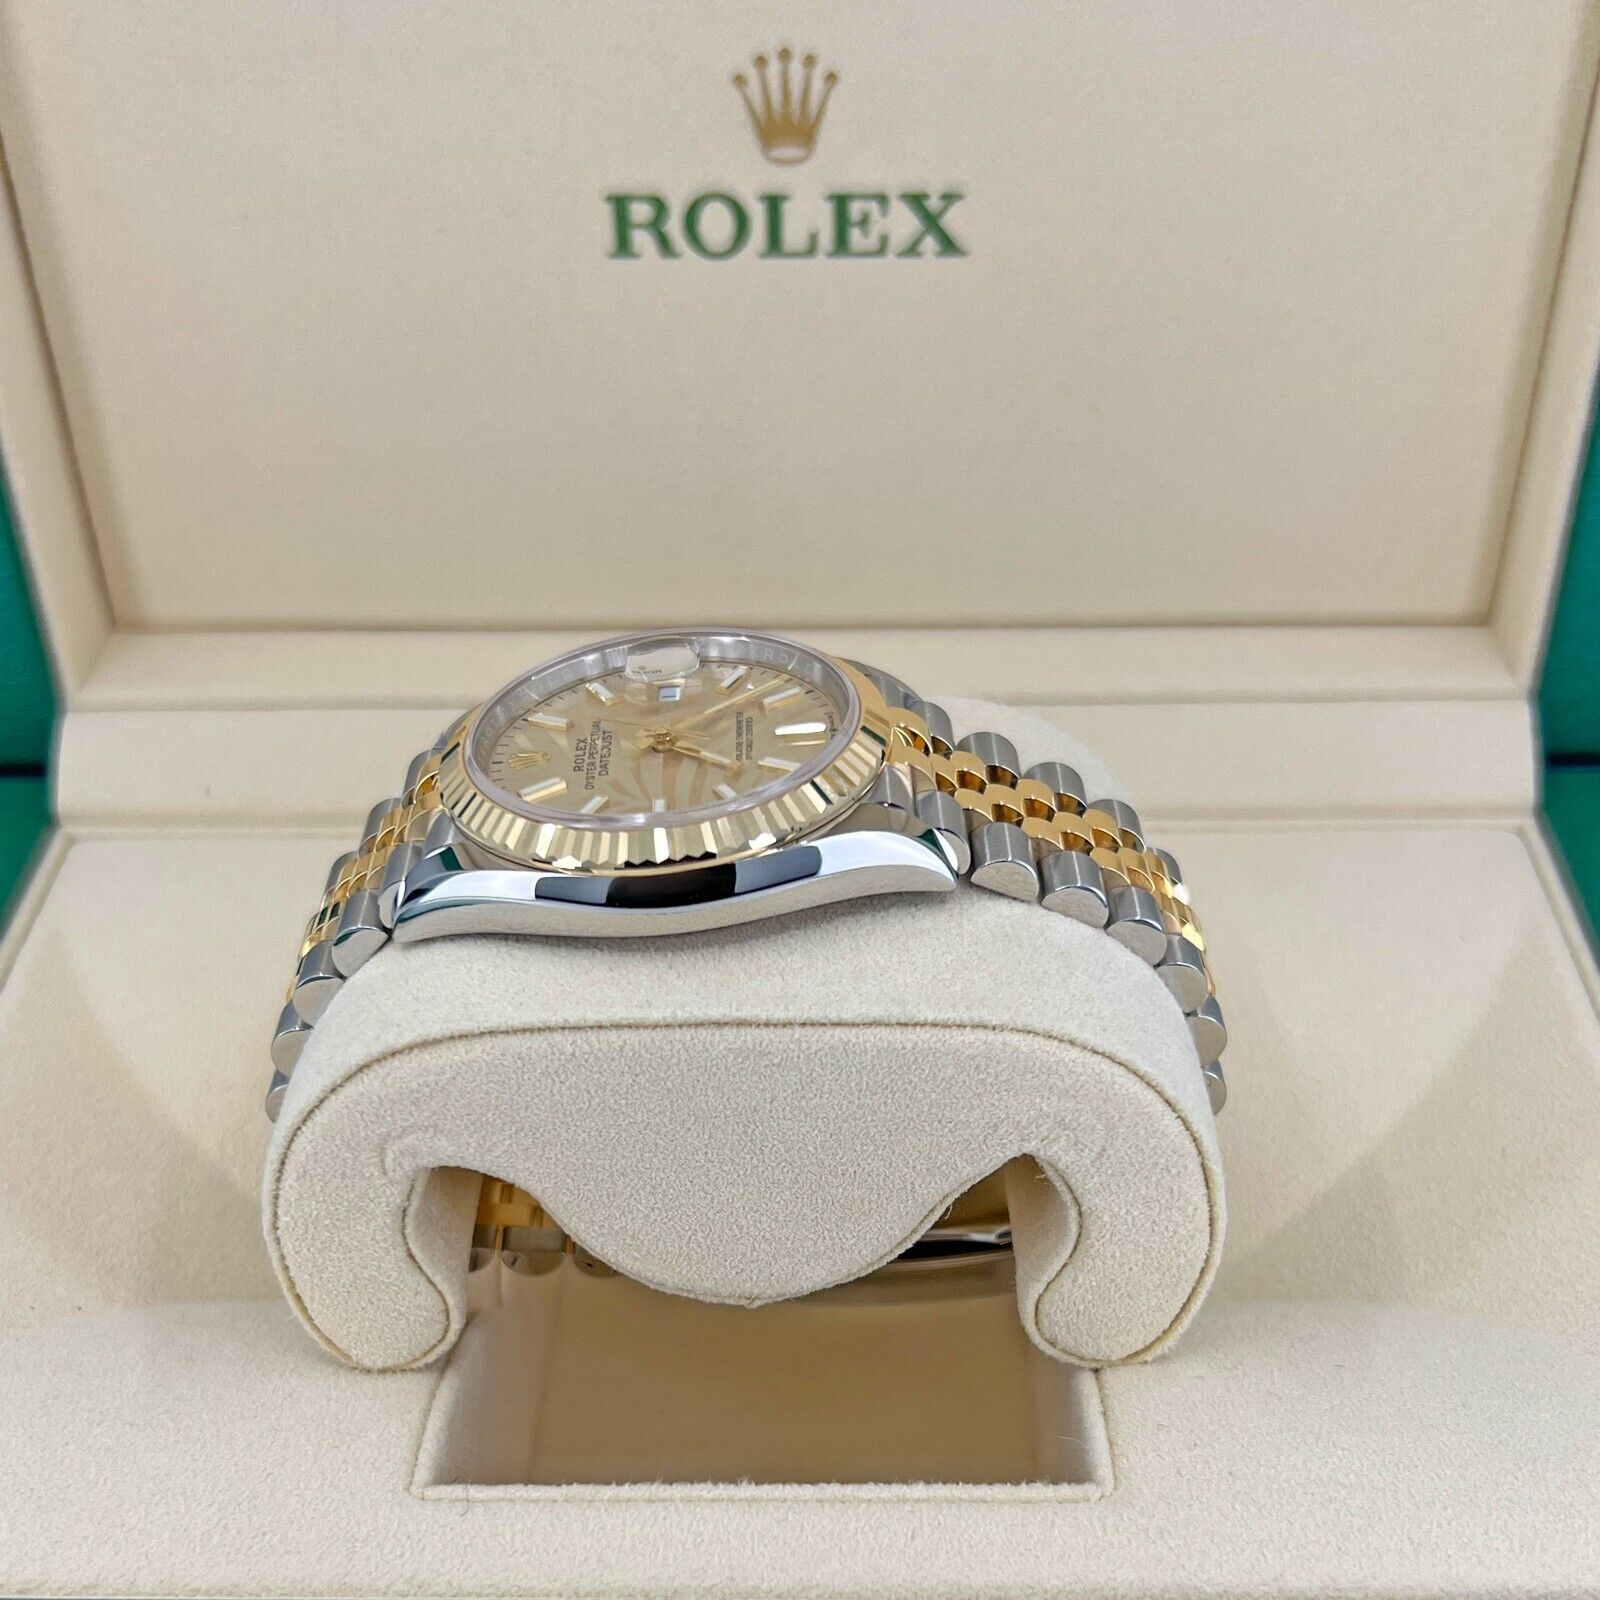 Rolex Datejust 36, 18k Yellow Gold and Stainless Steel, 36mm, Golden, palm motif dial, Ref# 126233-0037, Left